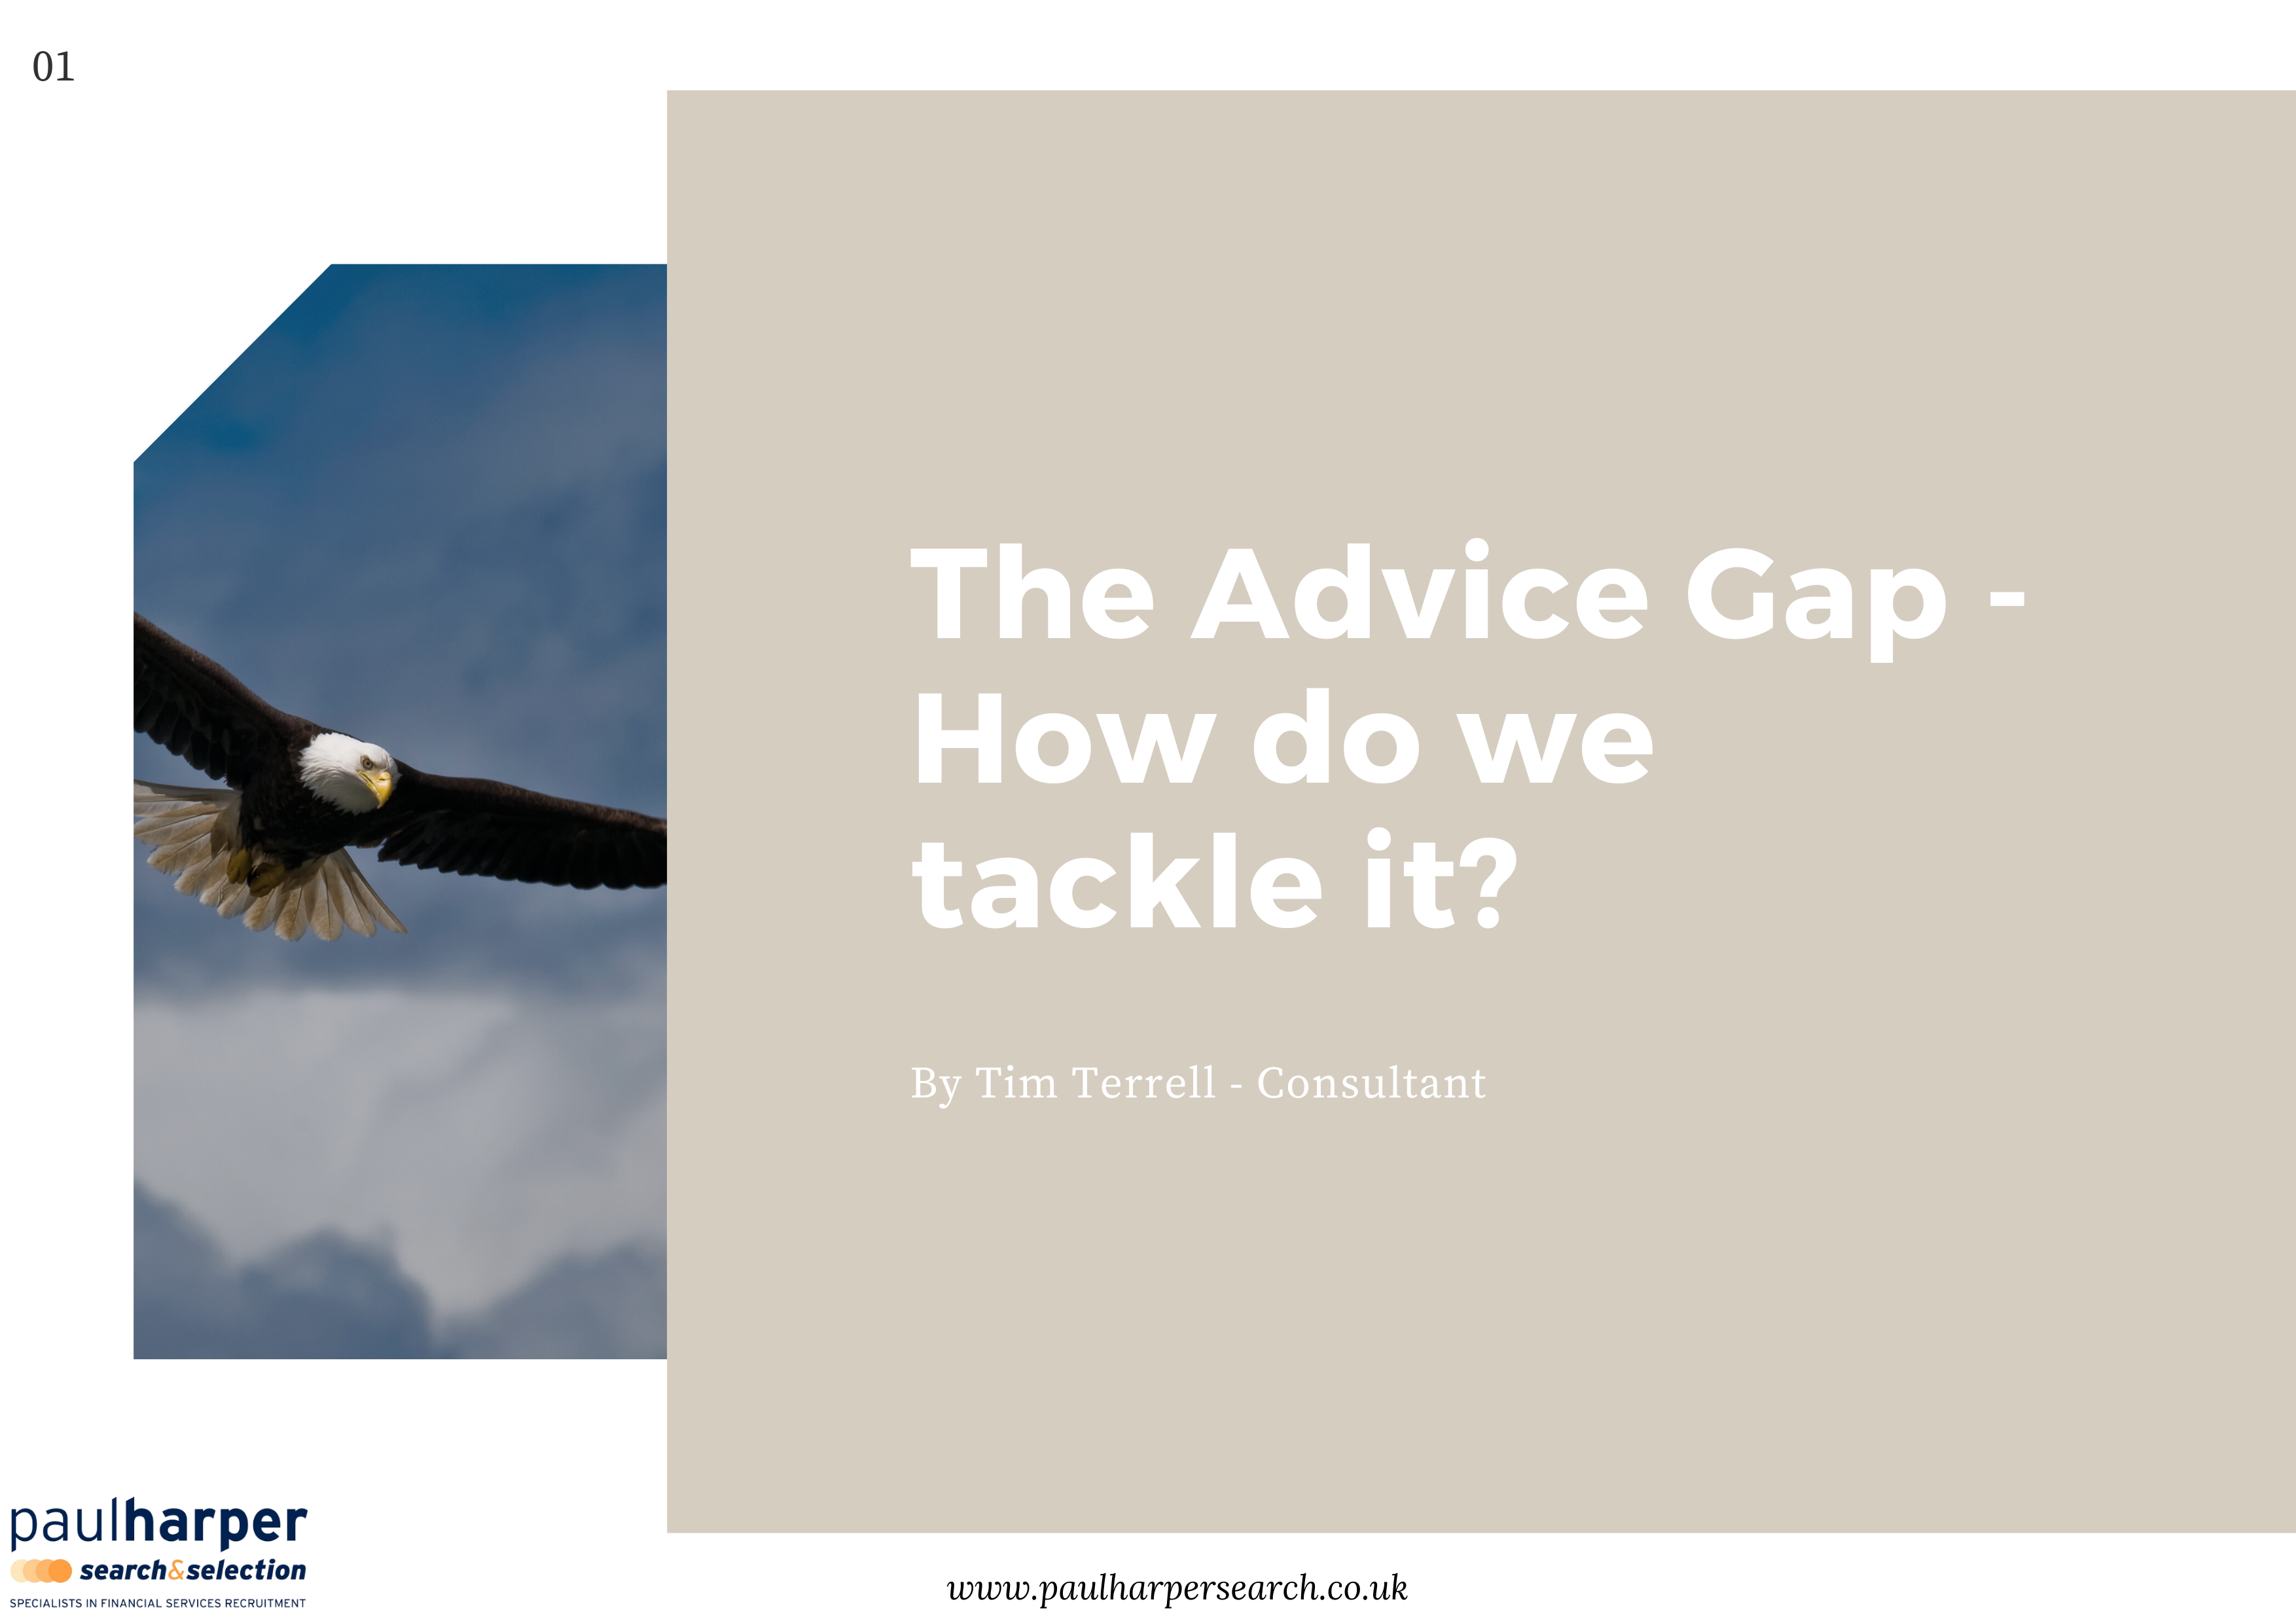 The Advice Gap - How do we tackle it?